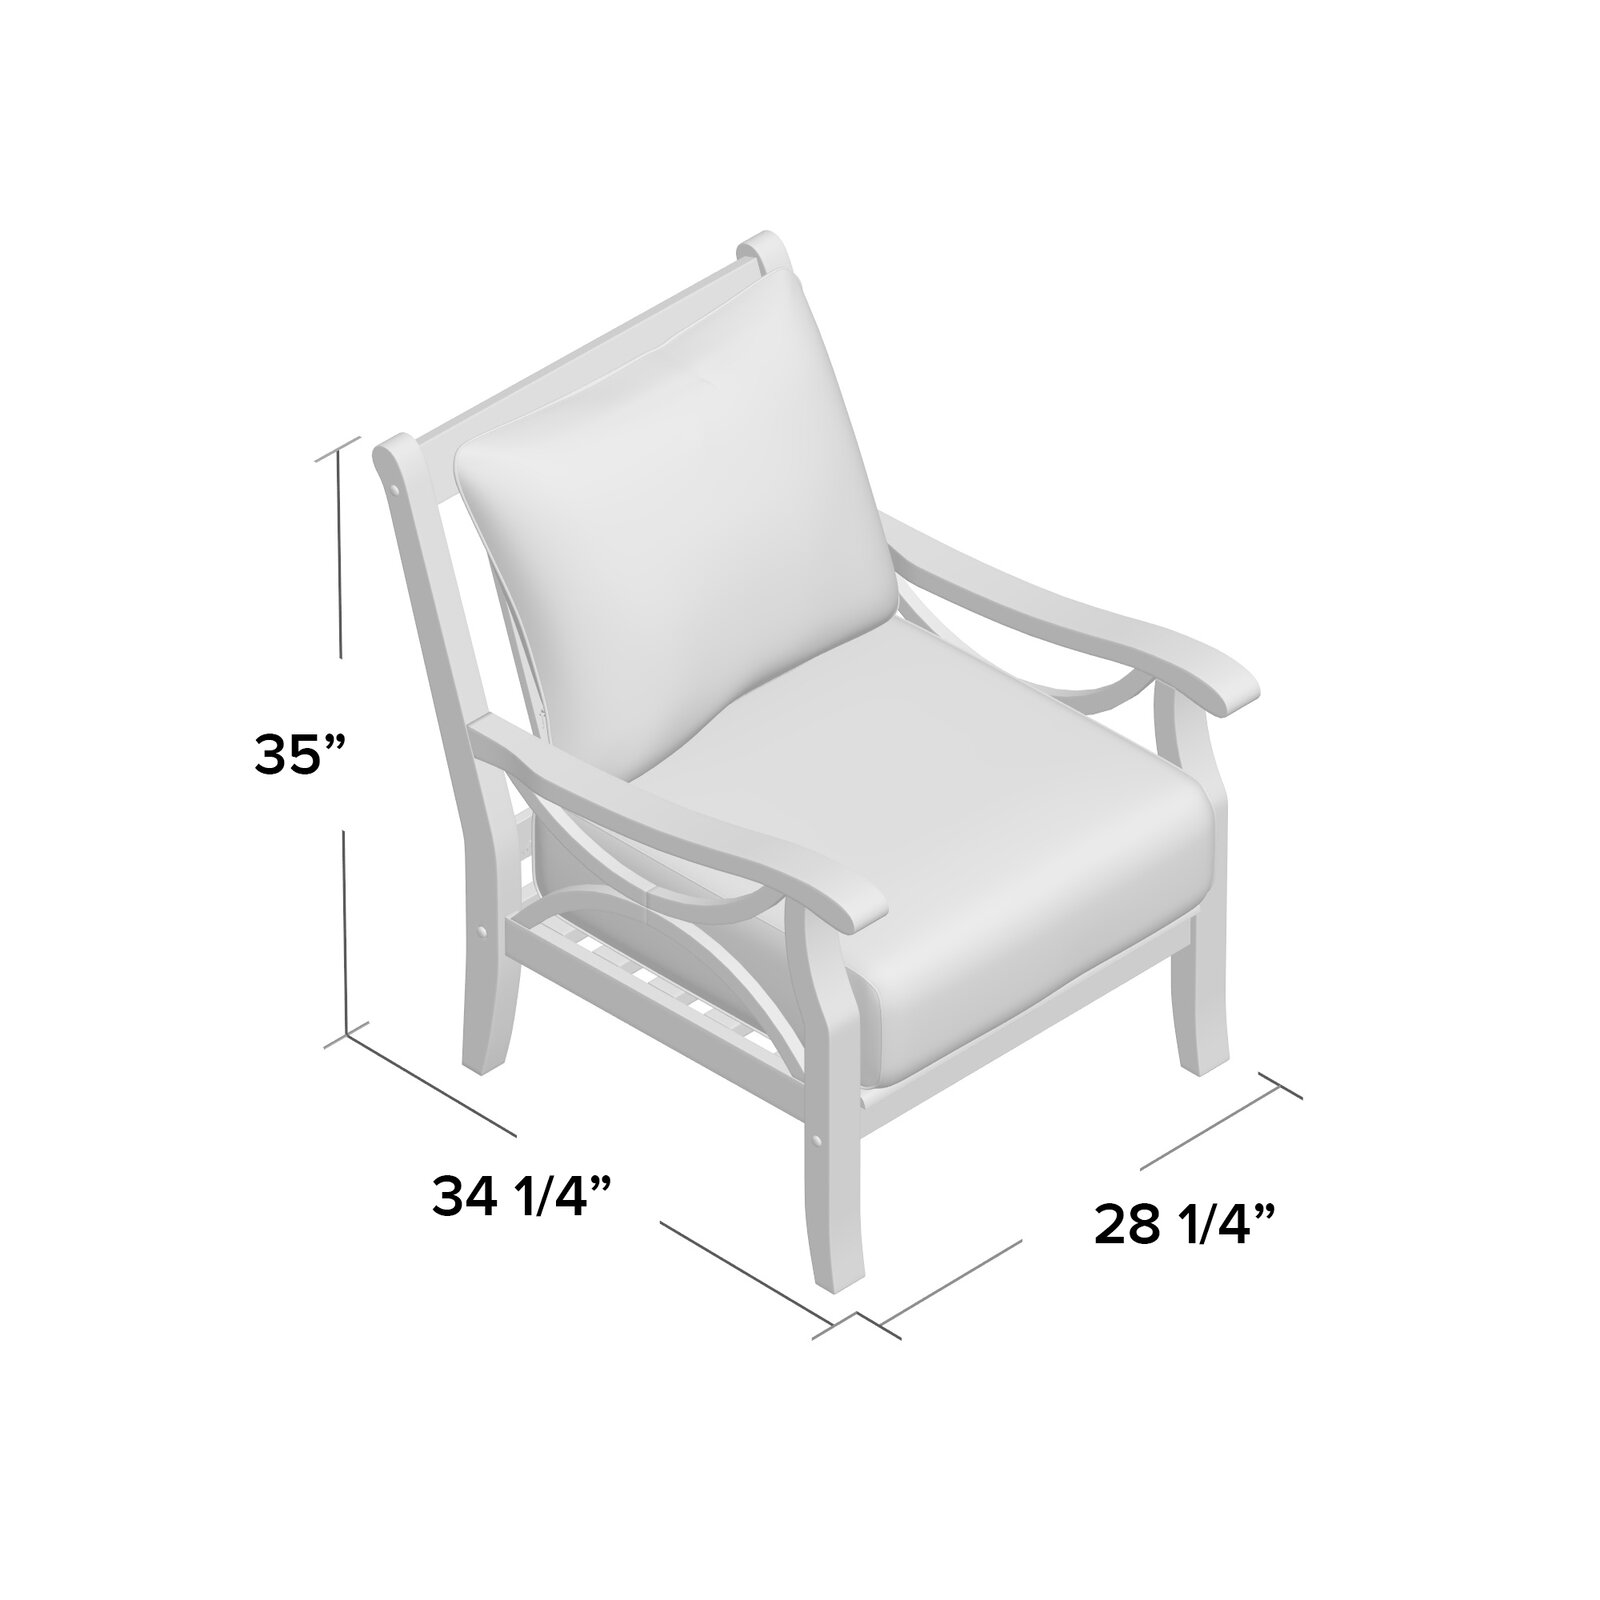 Brunswick Teak Patio Chair with Cushions, Pieces Included: 1 Chair, : 11" - image 2 of 7